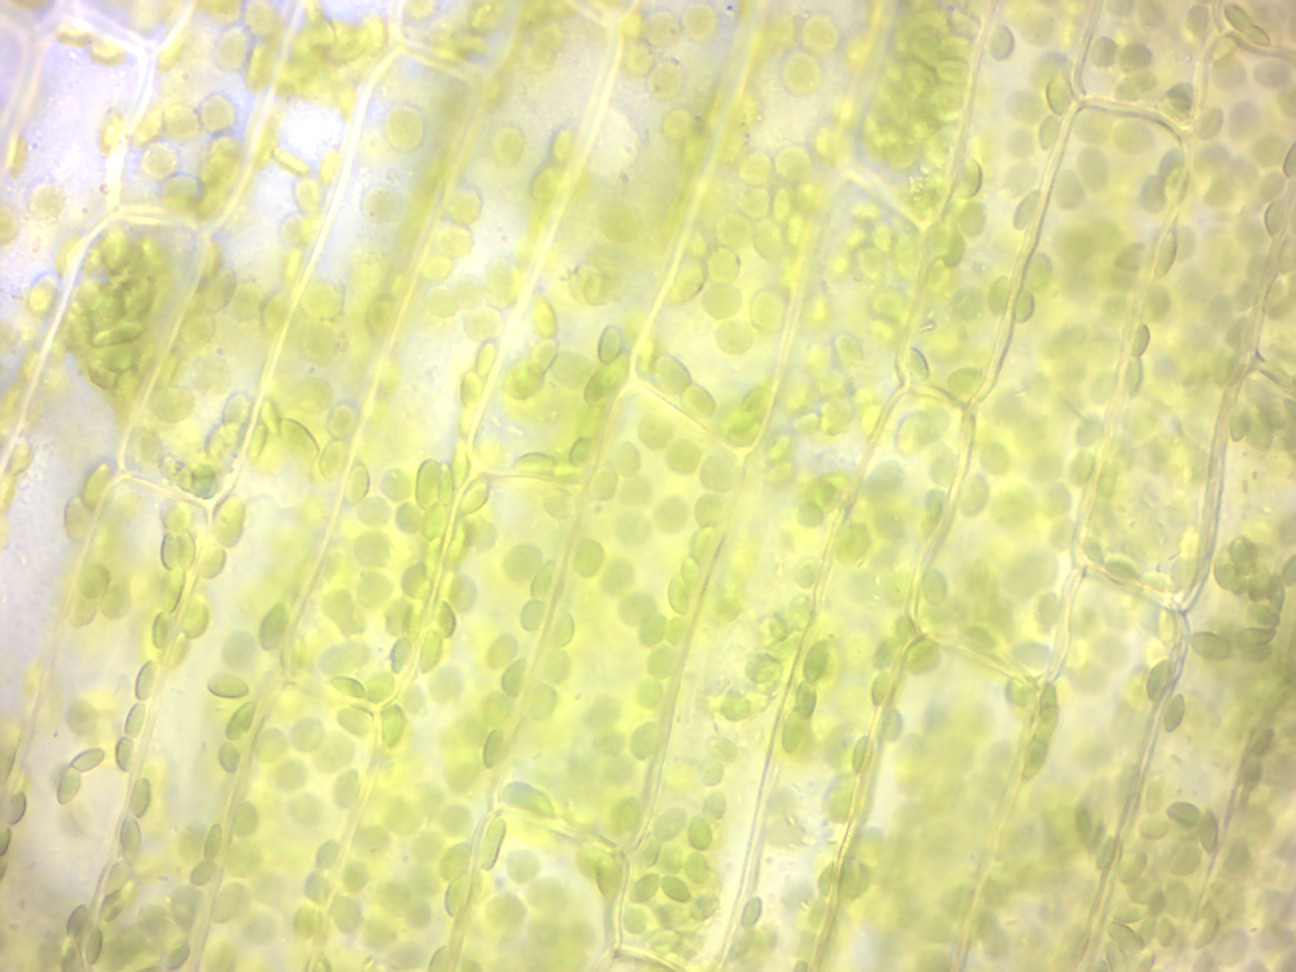 Elodea wet mount (100× oil immersion objective).